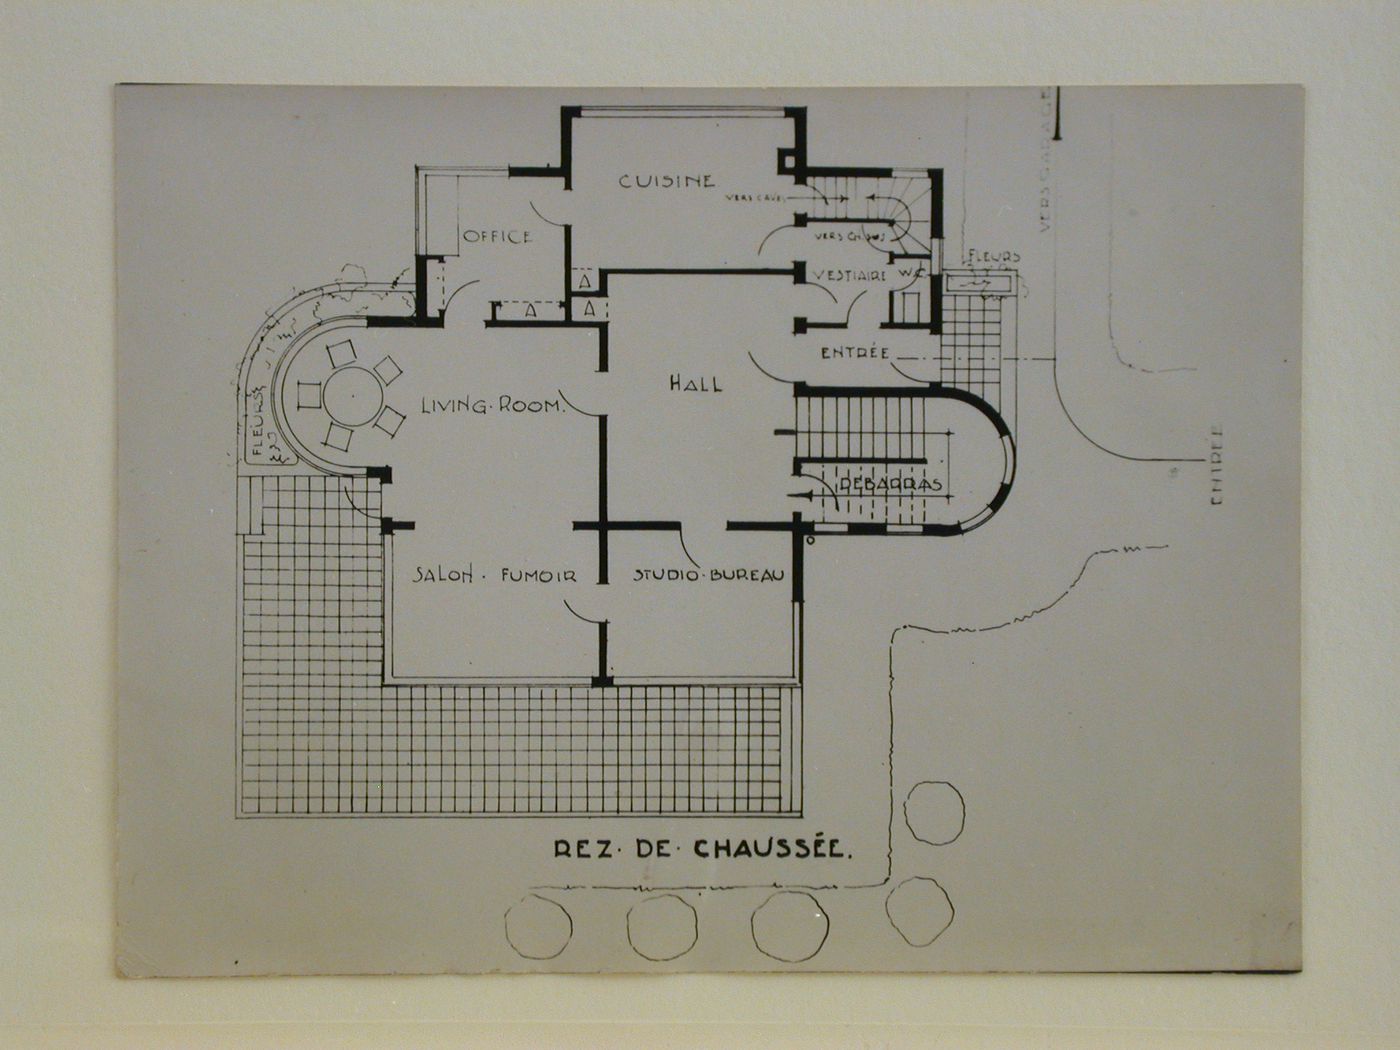 View of a plan drawing for a house